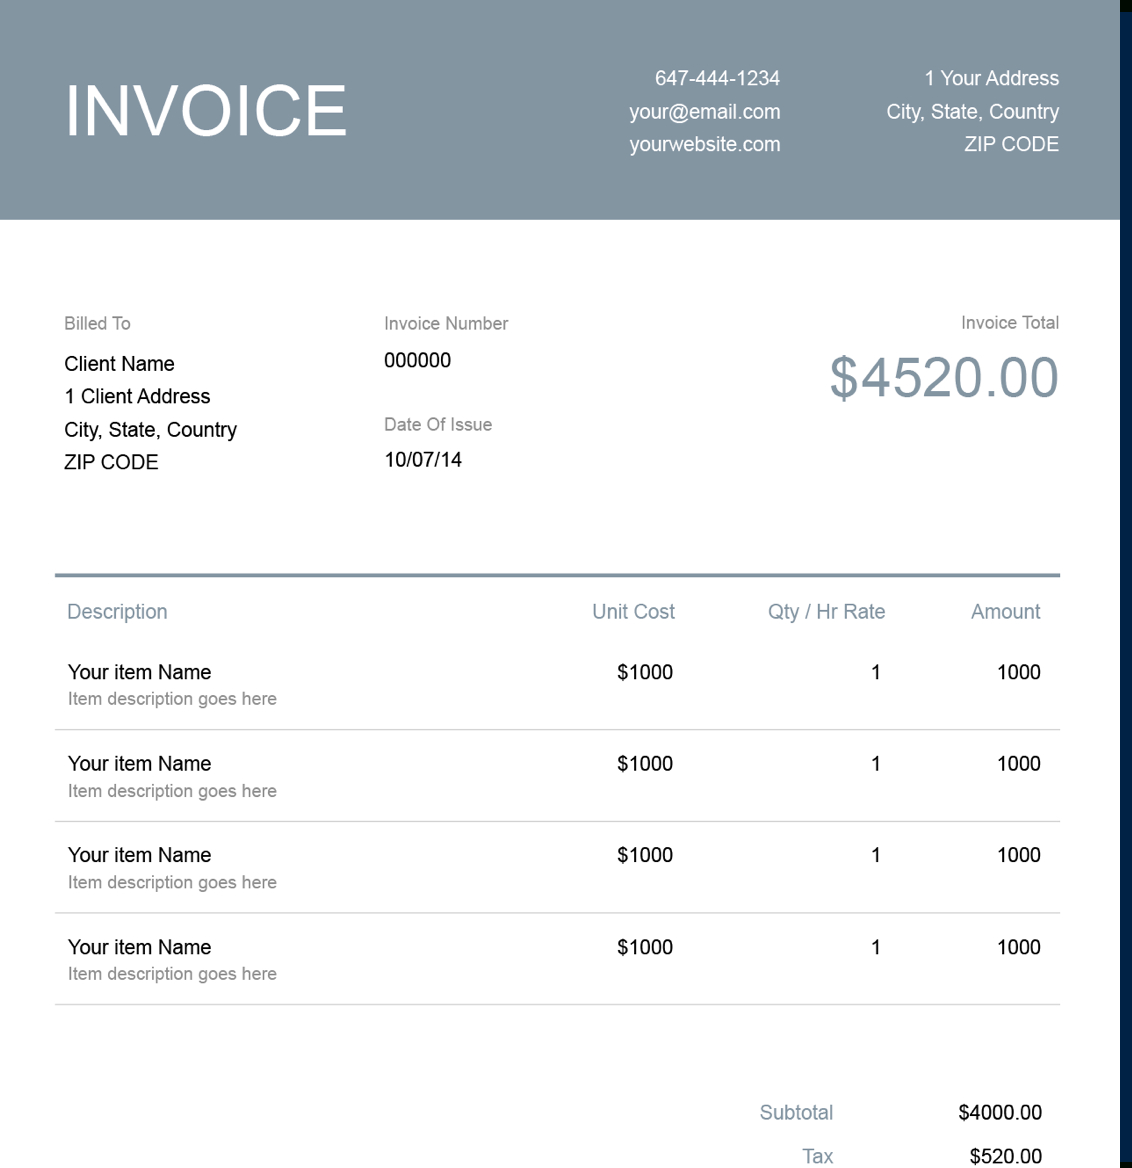 How To Fill Out An Invoice | Professional Invoicing Checklist Inside Invoice Checklist Template